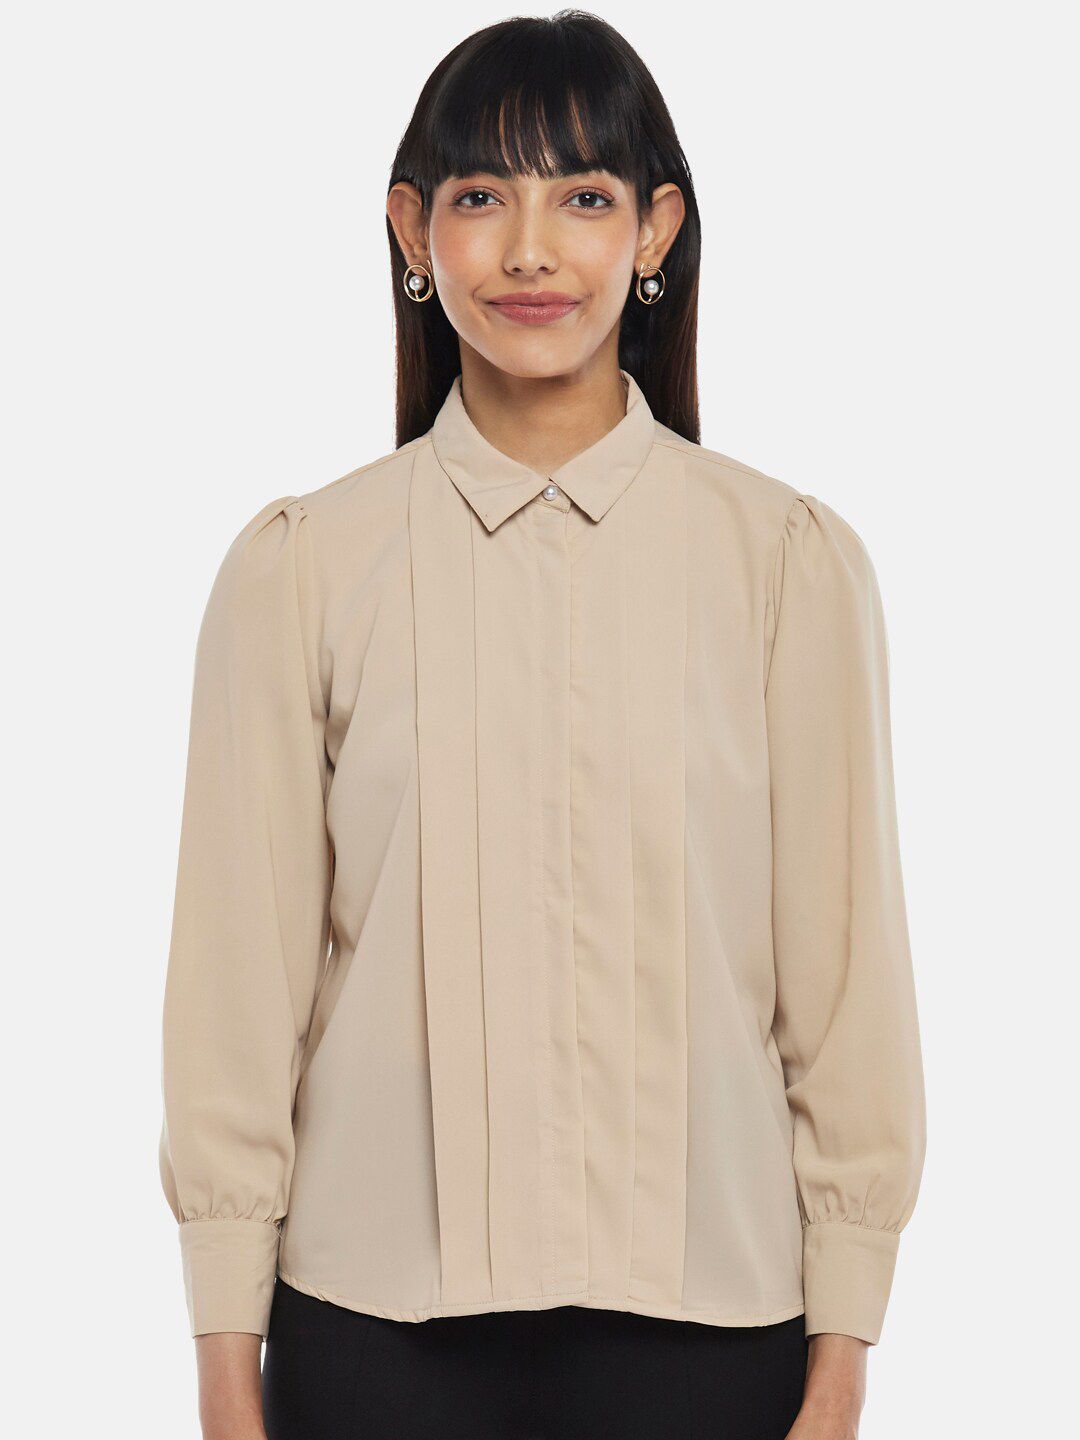 Annabelle by Pantaloons Women Beige Shirt Style Top Price in India